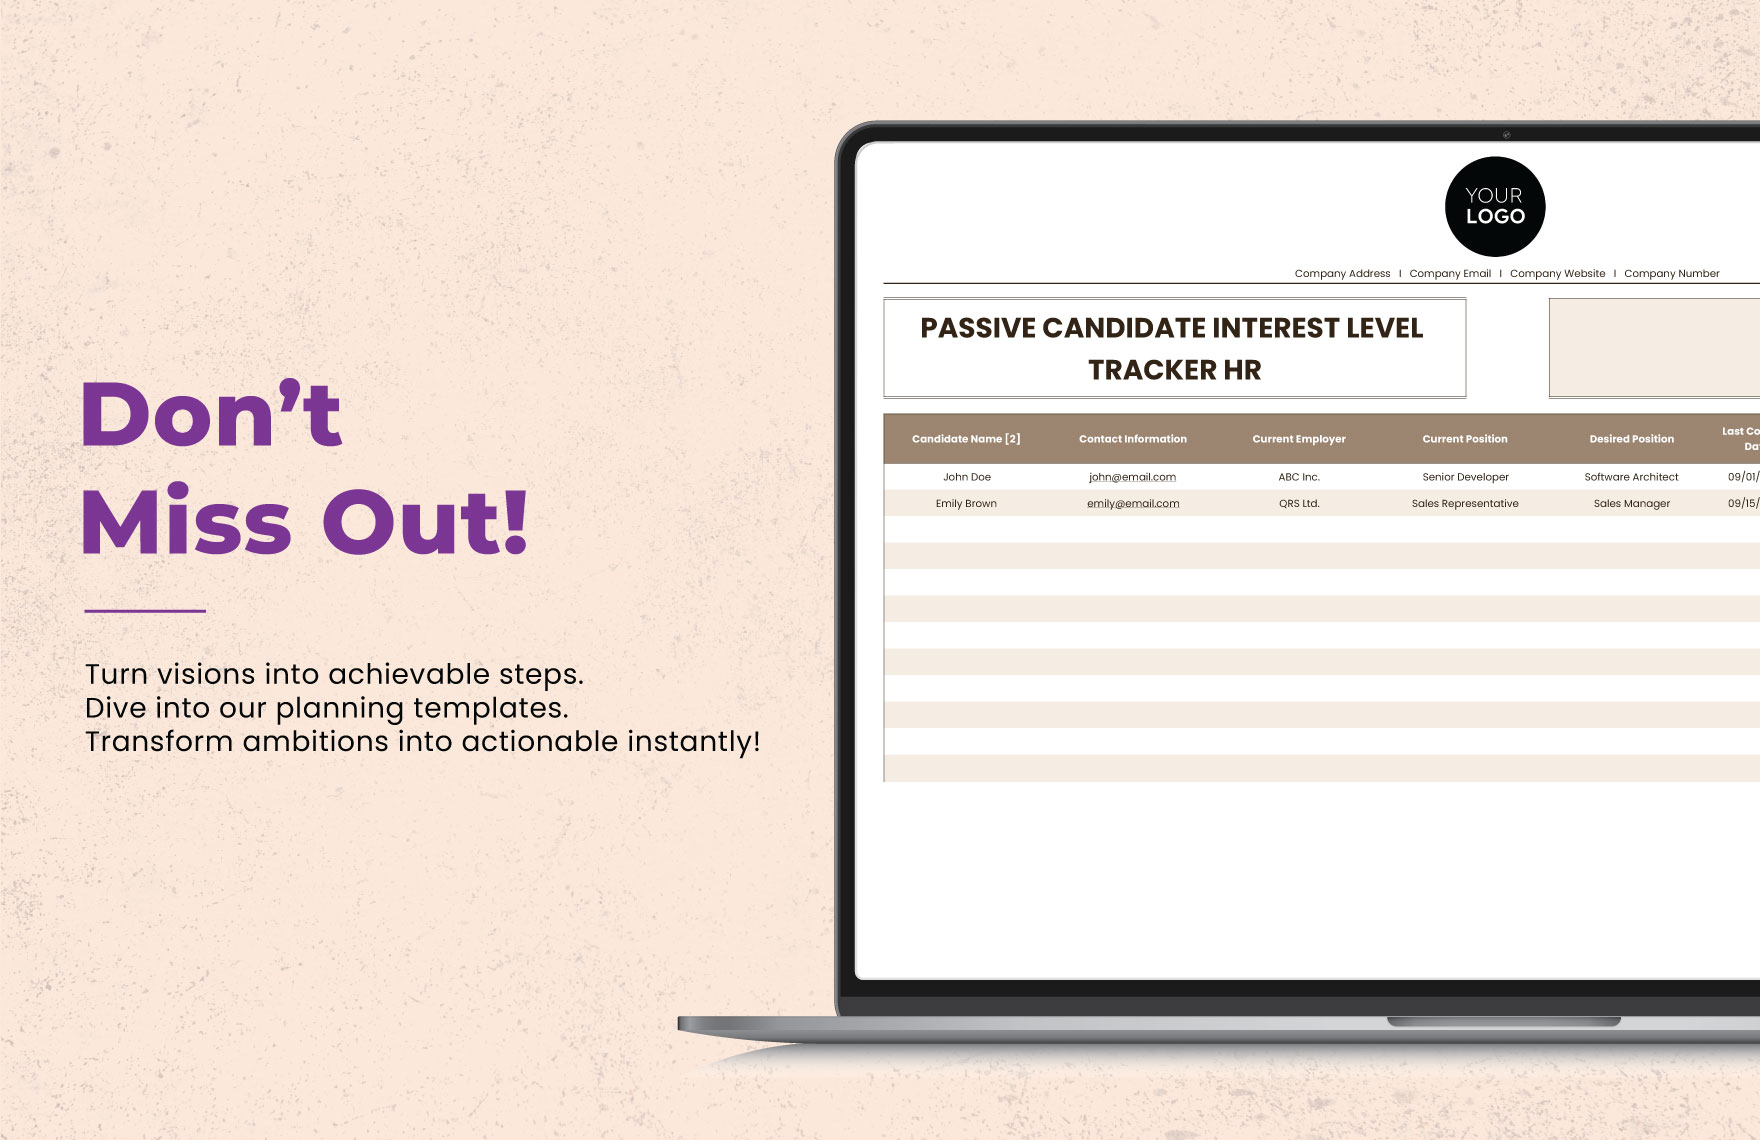 Passive Candidate Interest Level Tracker HR Template